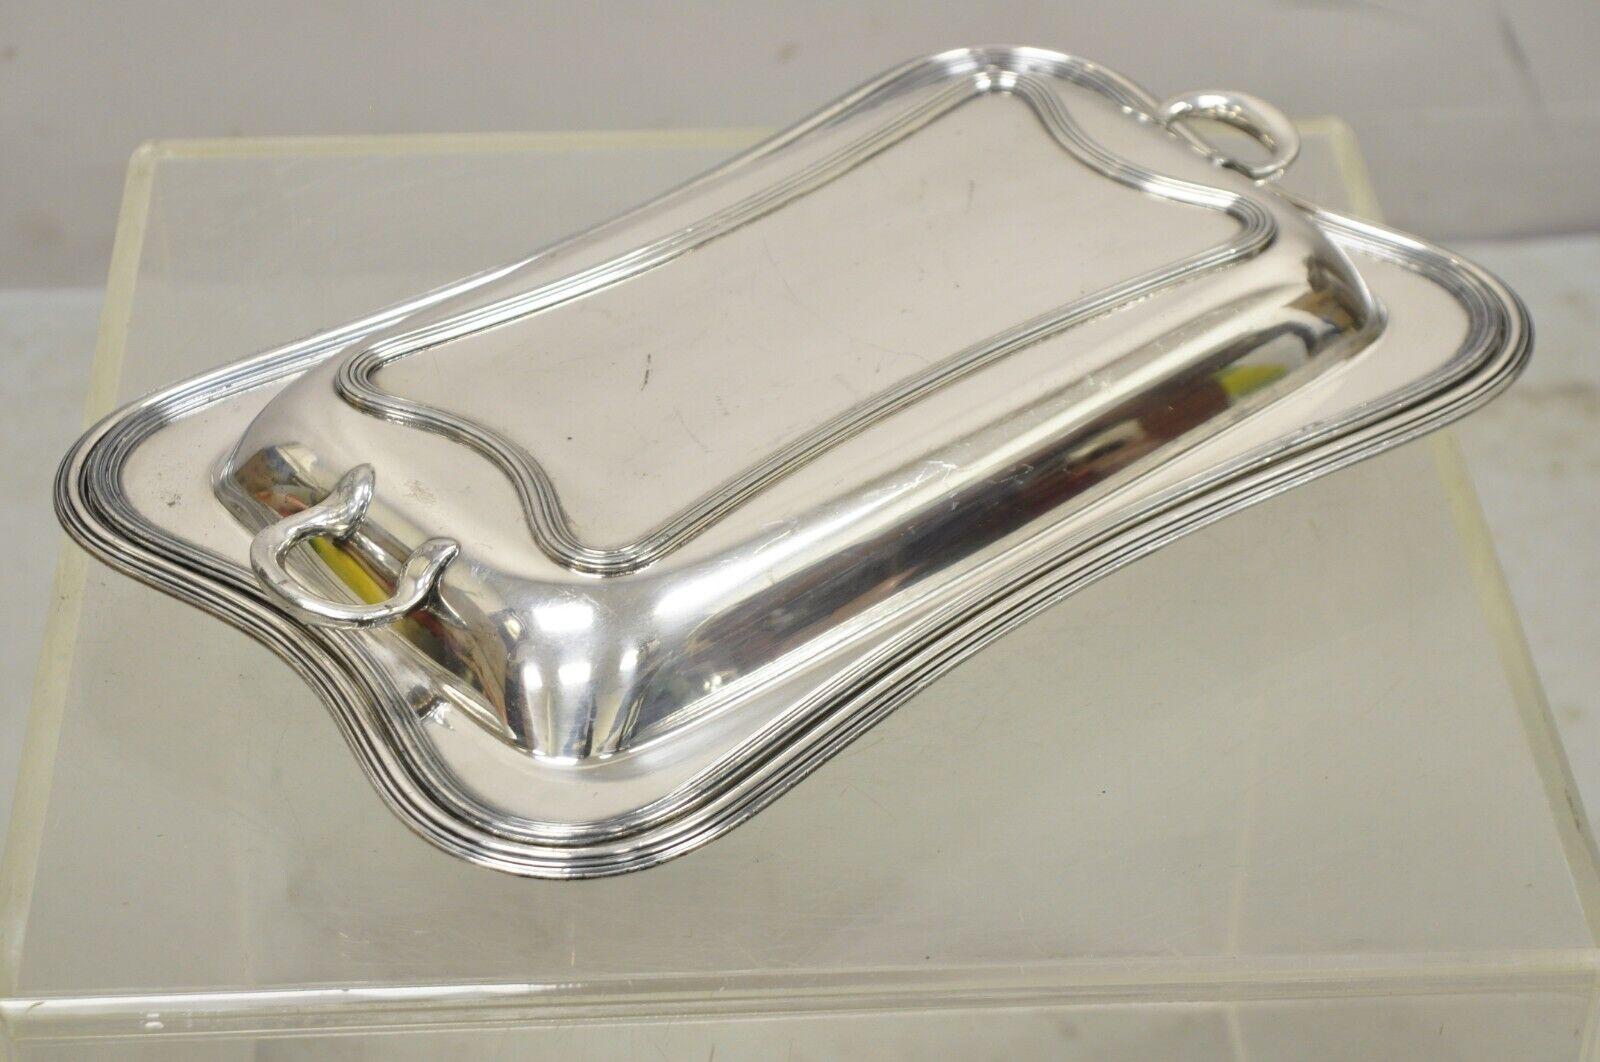 Vintage Barbour SP Co International Silver Plated 6045 Lidded Vegetable Serving Dish Platter. Item features 3 interior sections, ornate twin handles, original stamp, very nice vintage item, quality craftsmanship, great style and form. circa Mid-20th